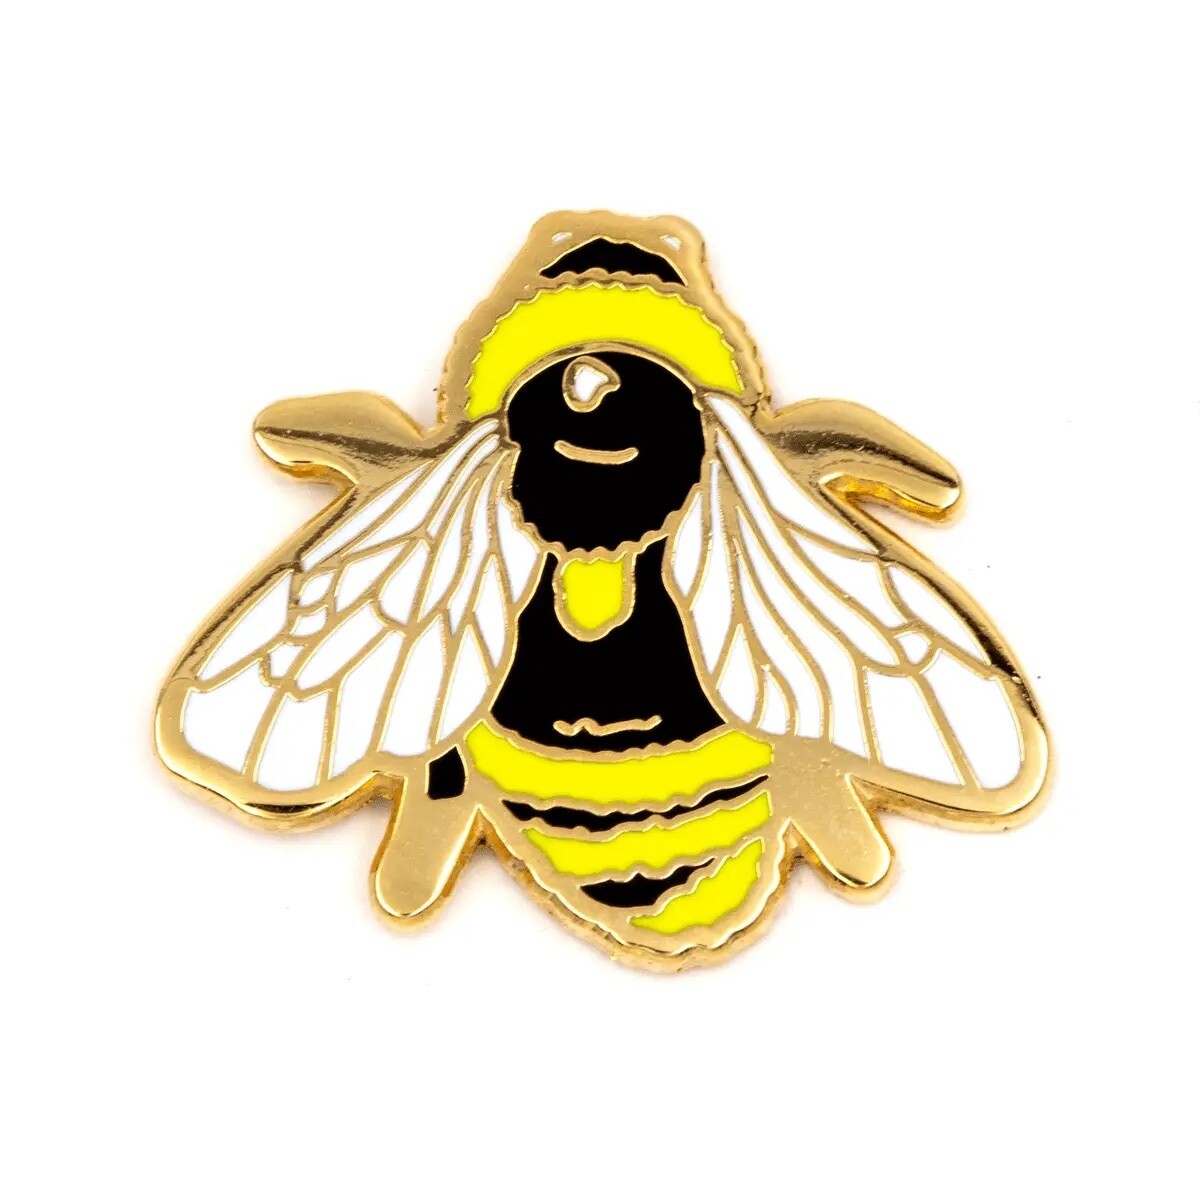 Honey Bee - Enamel Pin by These Are Things